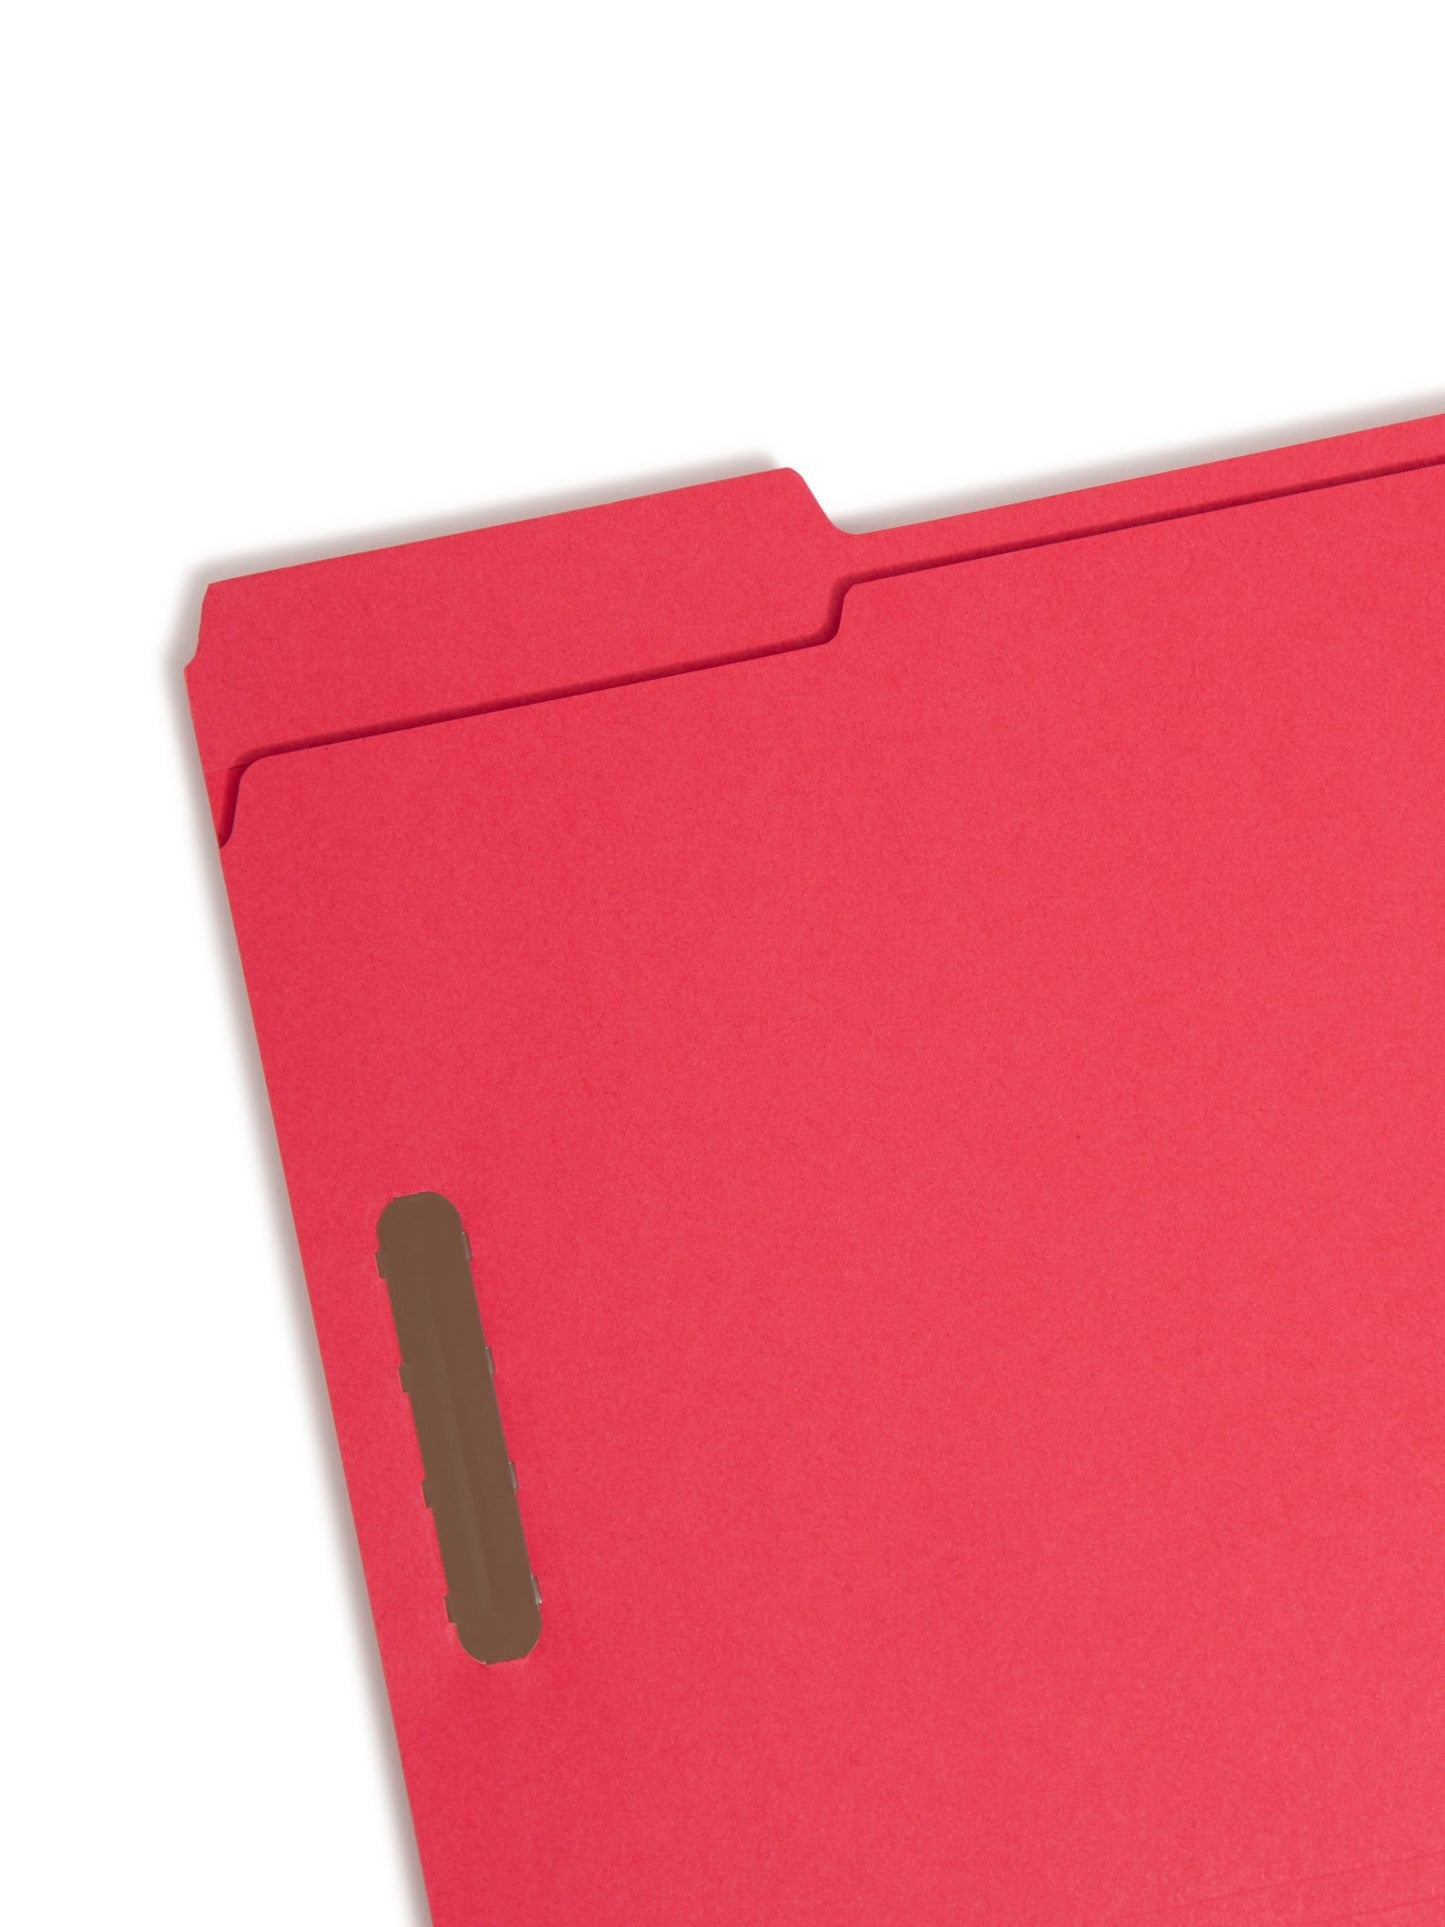 Reinforced Tab Fastener File Folders, 1/3-Cut Tab, 2 Fasteners, Red Color, Letter Size, Set of 50, 086486127400